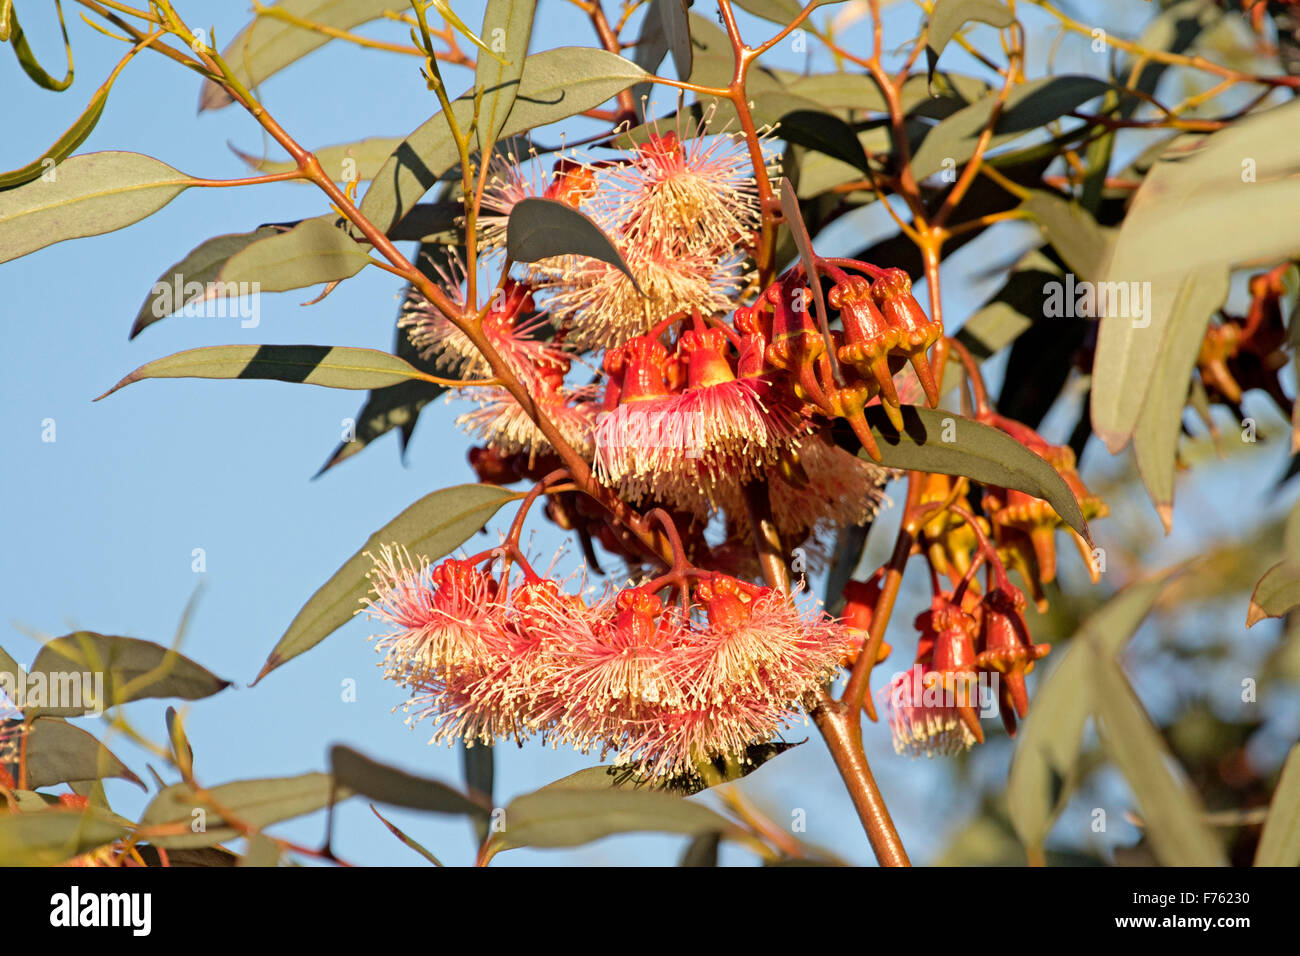 Cluster of red / pink flowers, buds & grey green leaves of Eucalyptus torquata, Australian Coral Gum tree against blue sky in outback Australia Stock Photo